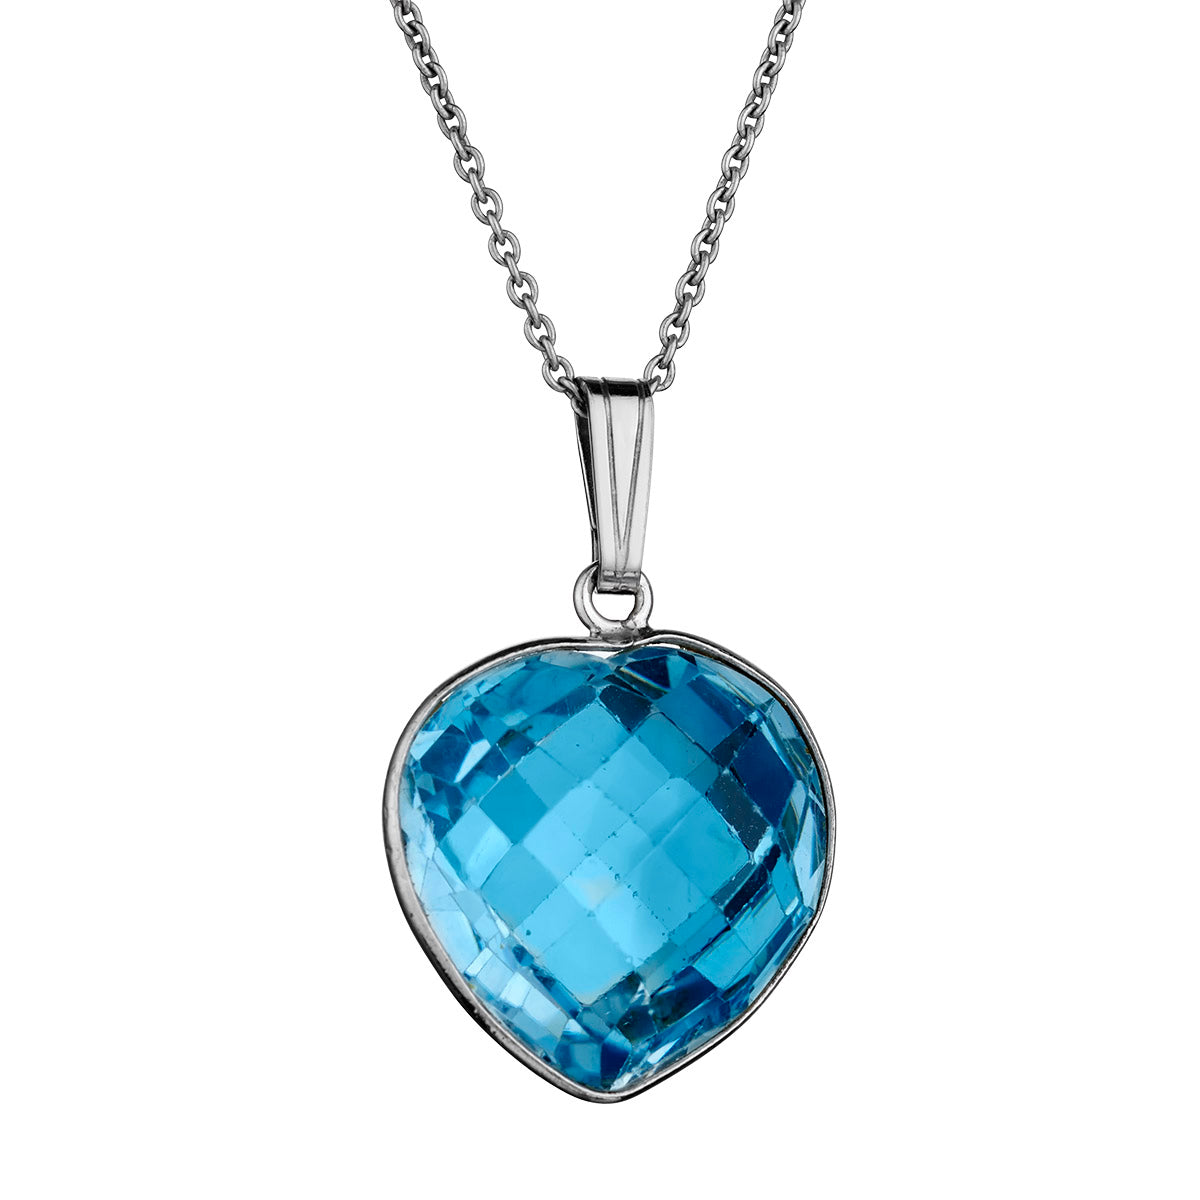 14.00 Carat Genuine Blue Topaz Heart Pendant,  Sterling Silver. Necklaces and Pendants. Griffin Jewellery Designs. 